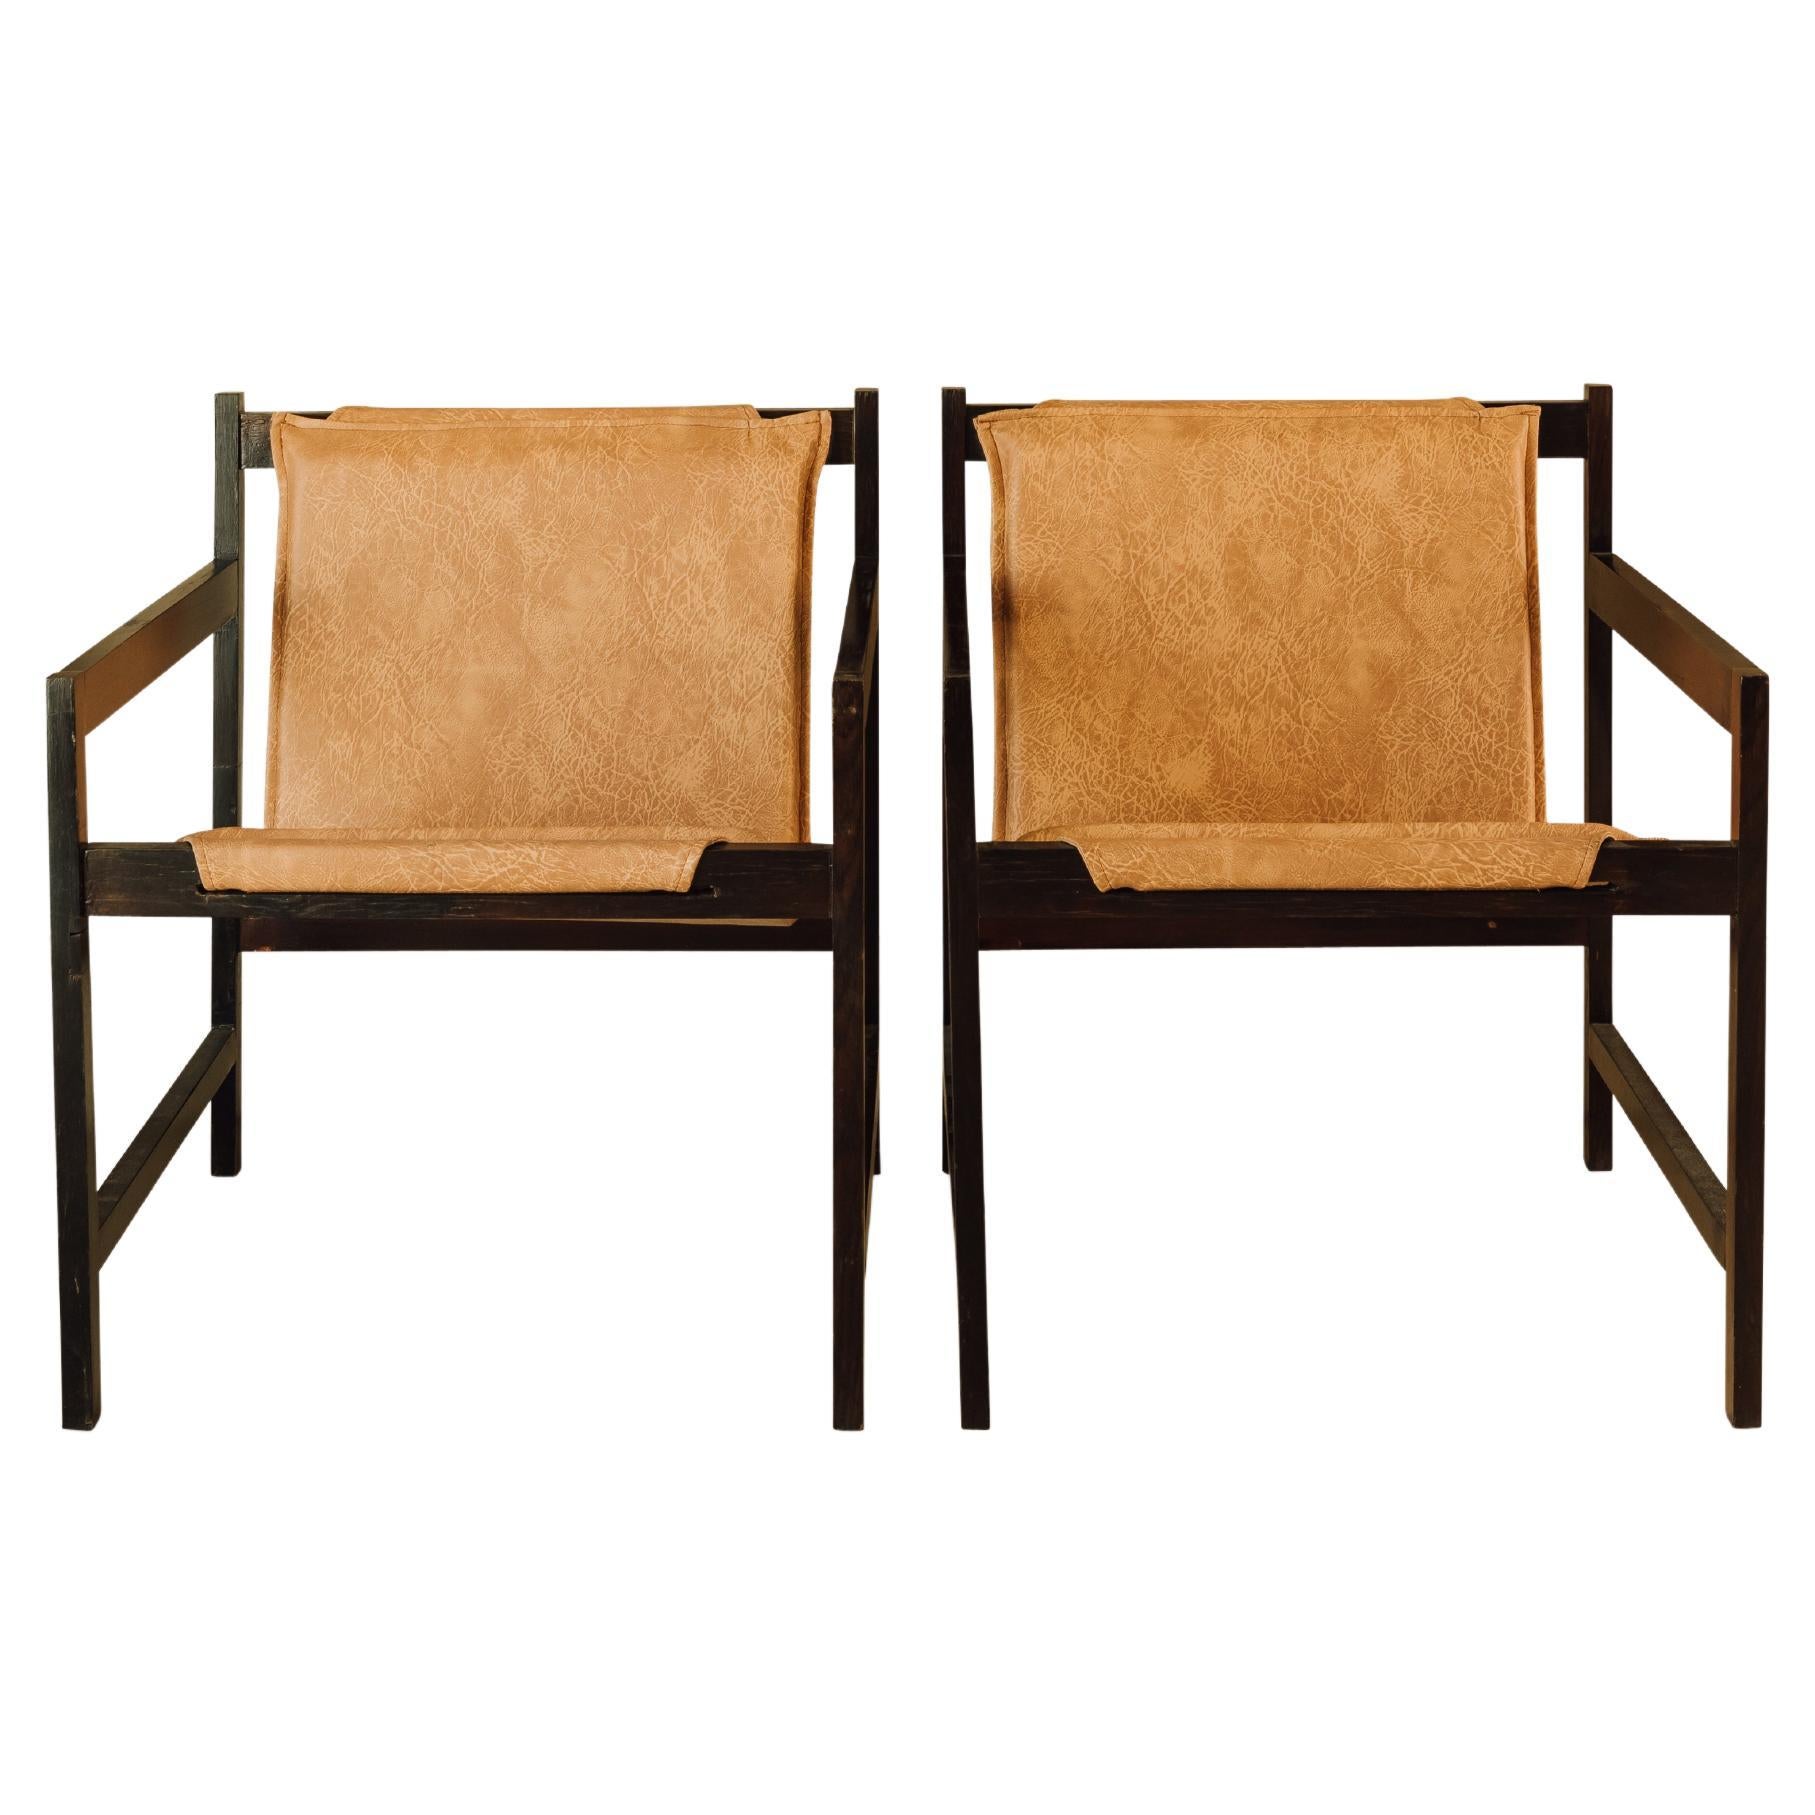 Lia Armchair by Sergio Rodrigues, 1962 For Sale